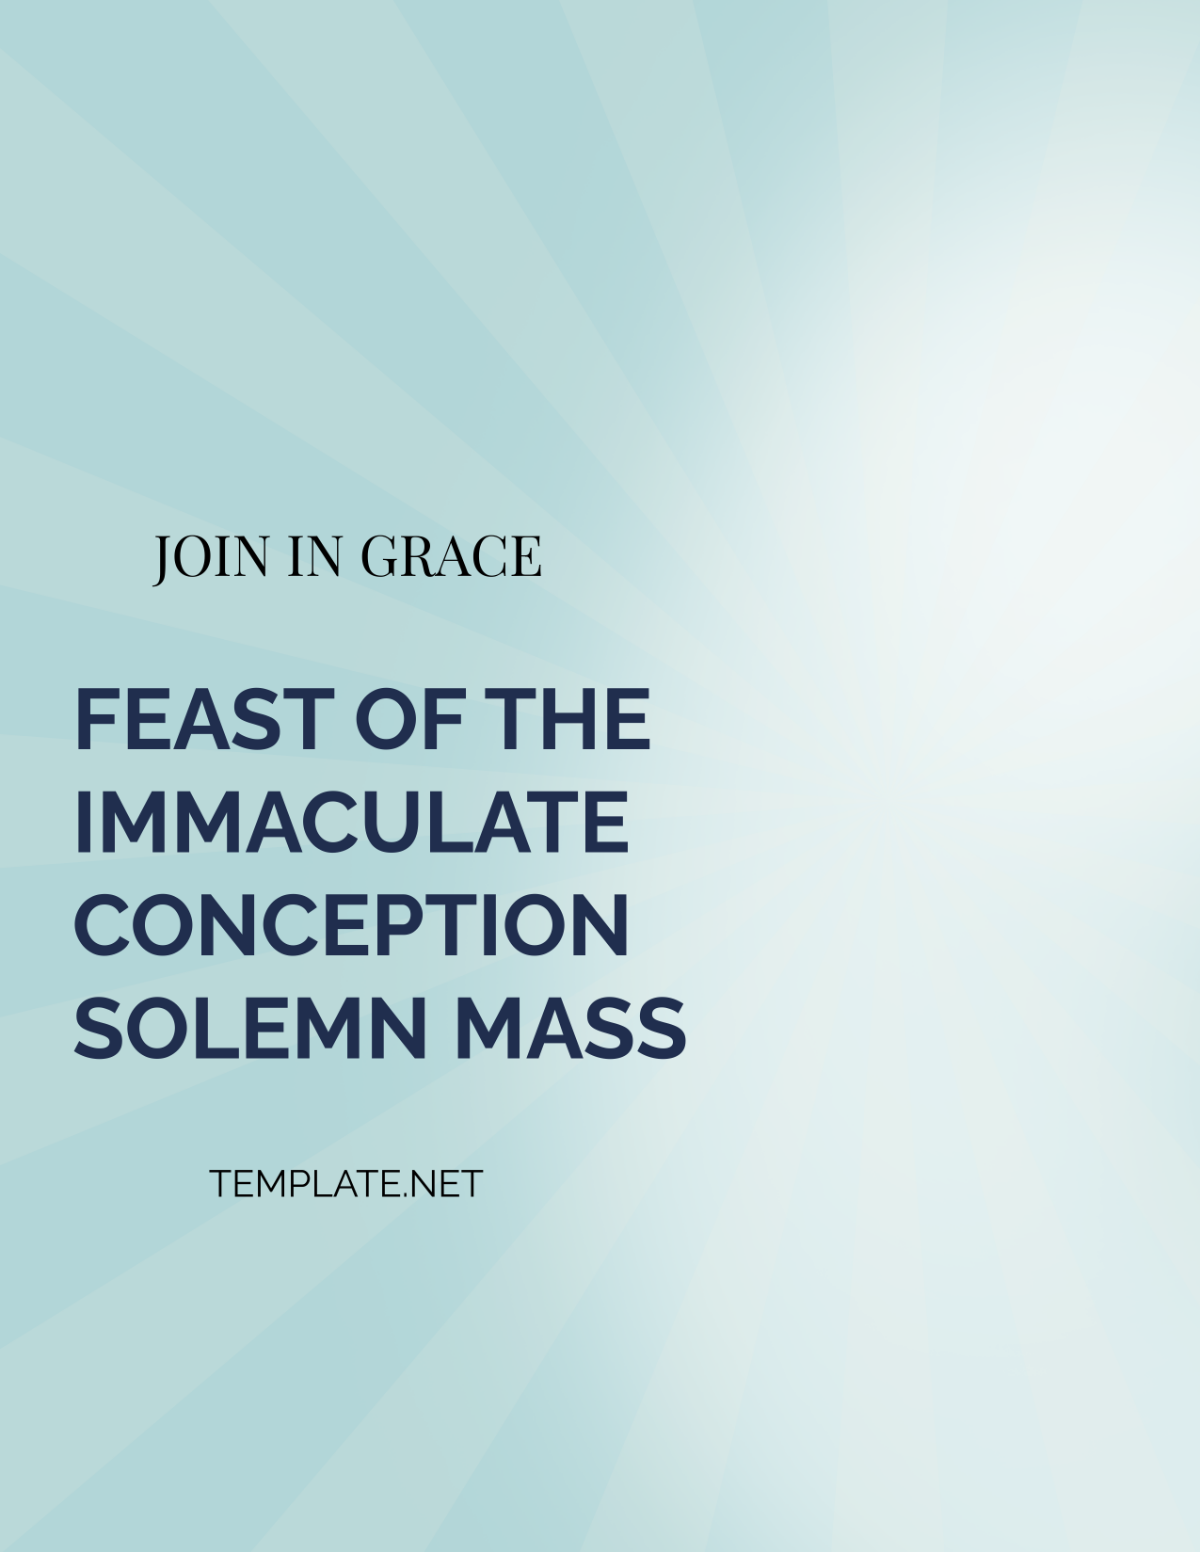 Feast of the Immaculate Conception Month Celebration Template